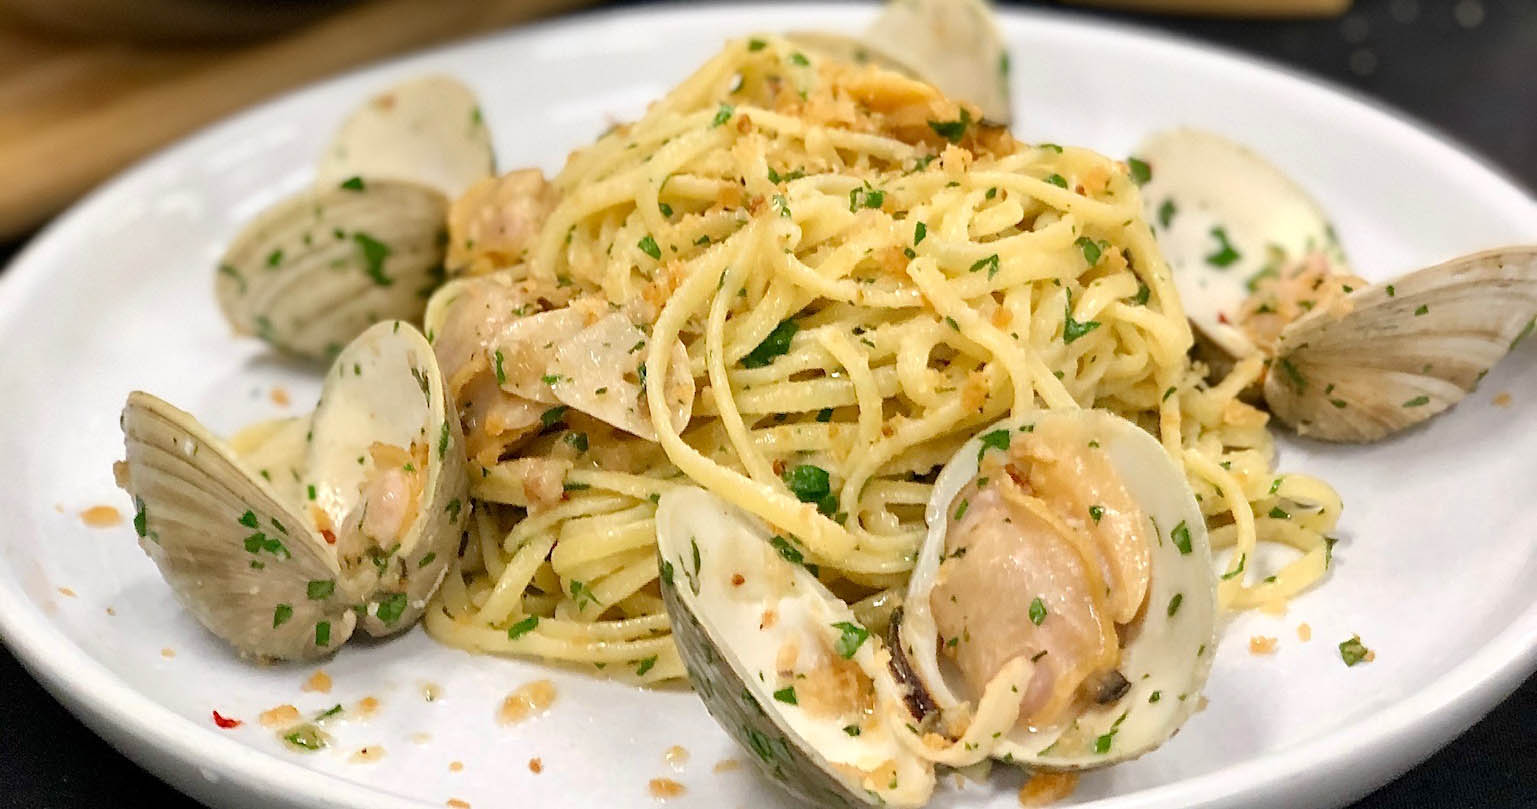 Linguini and clams on a plate